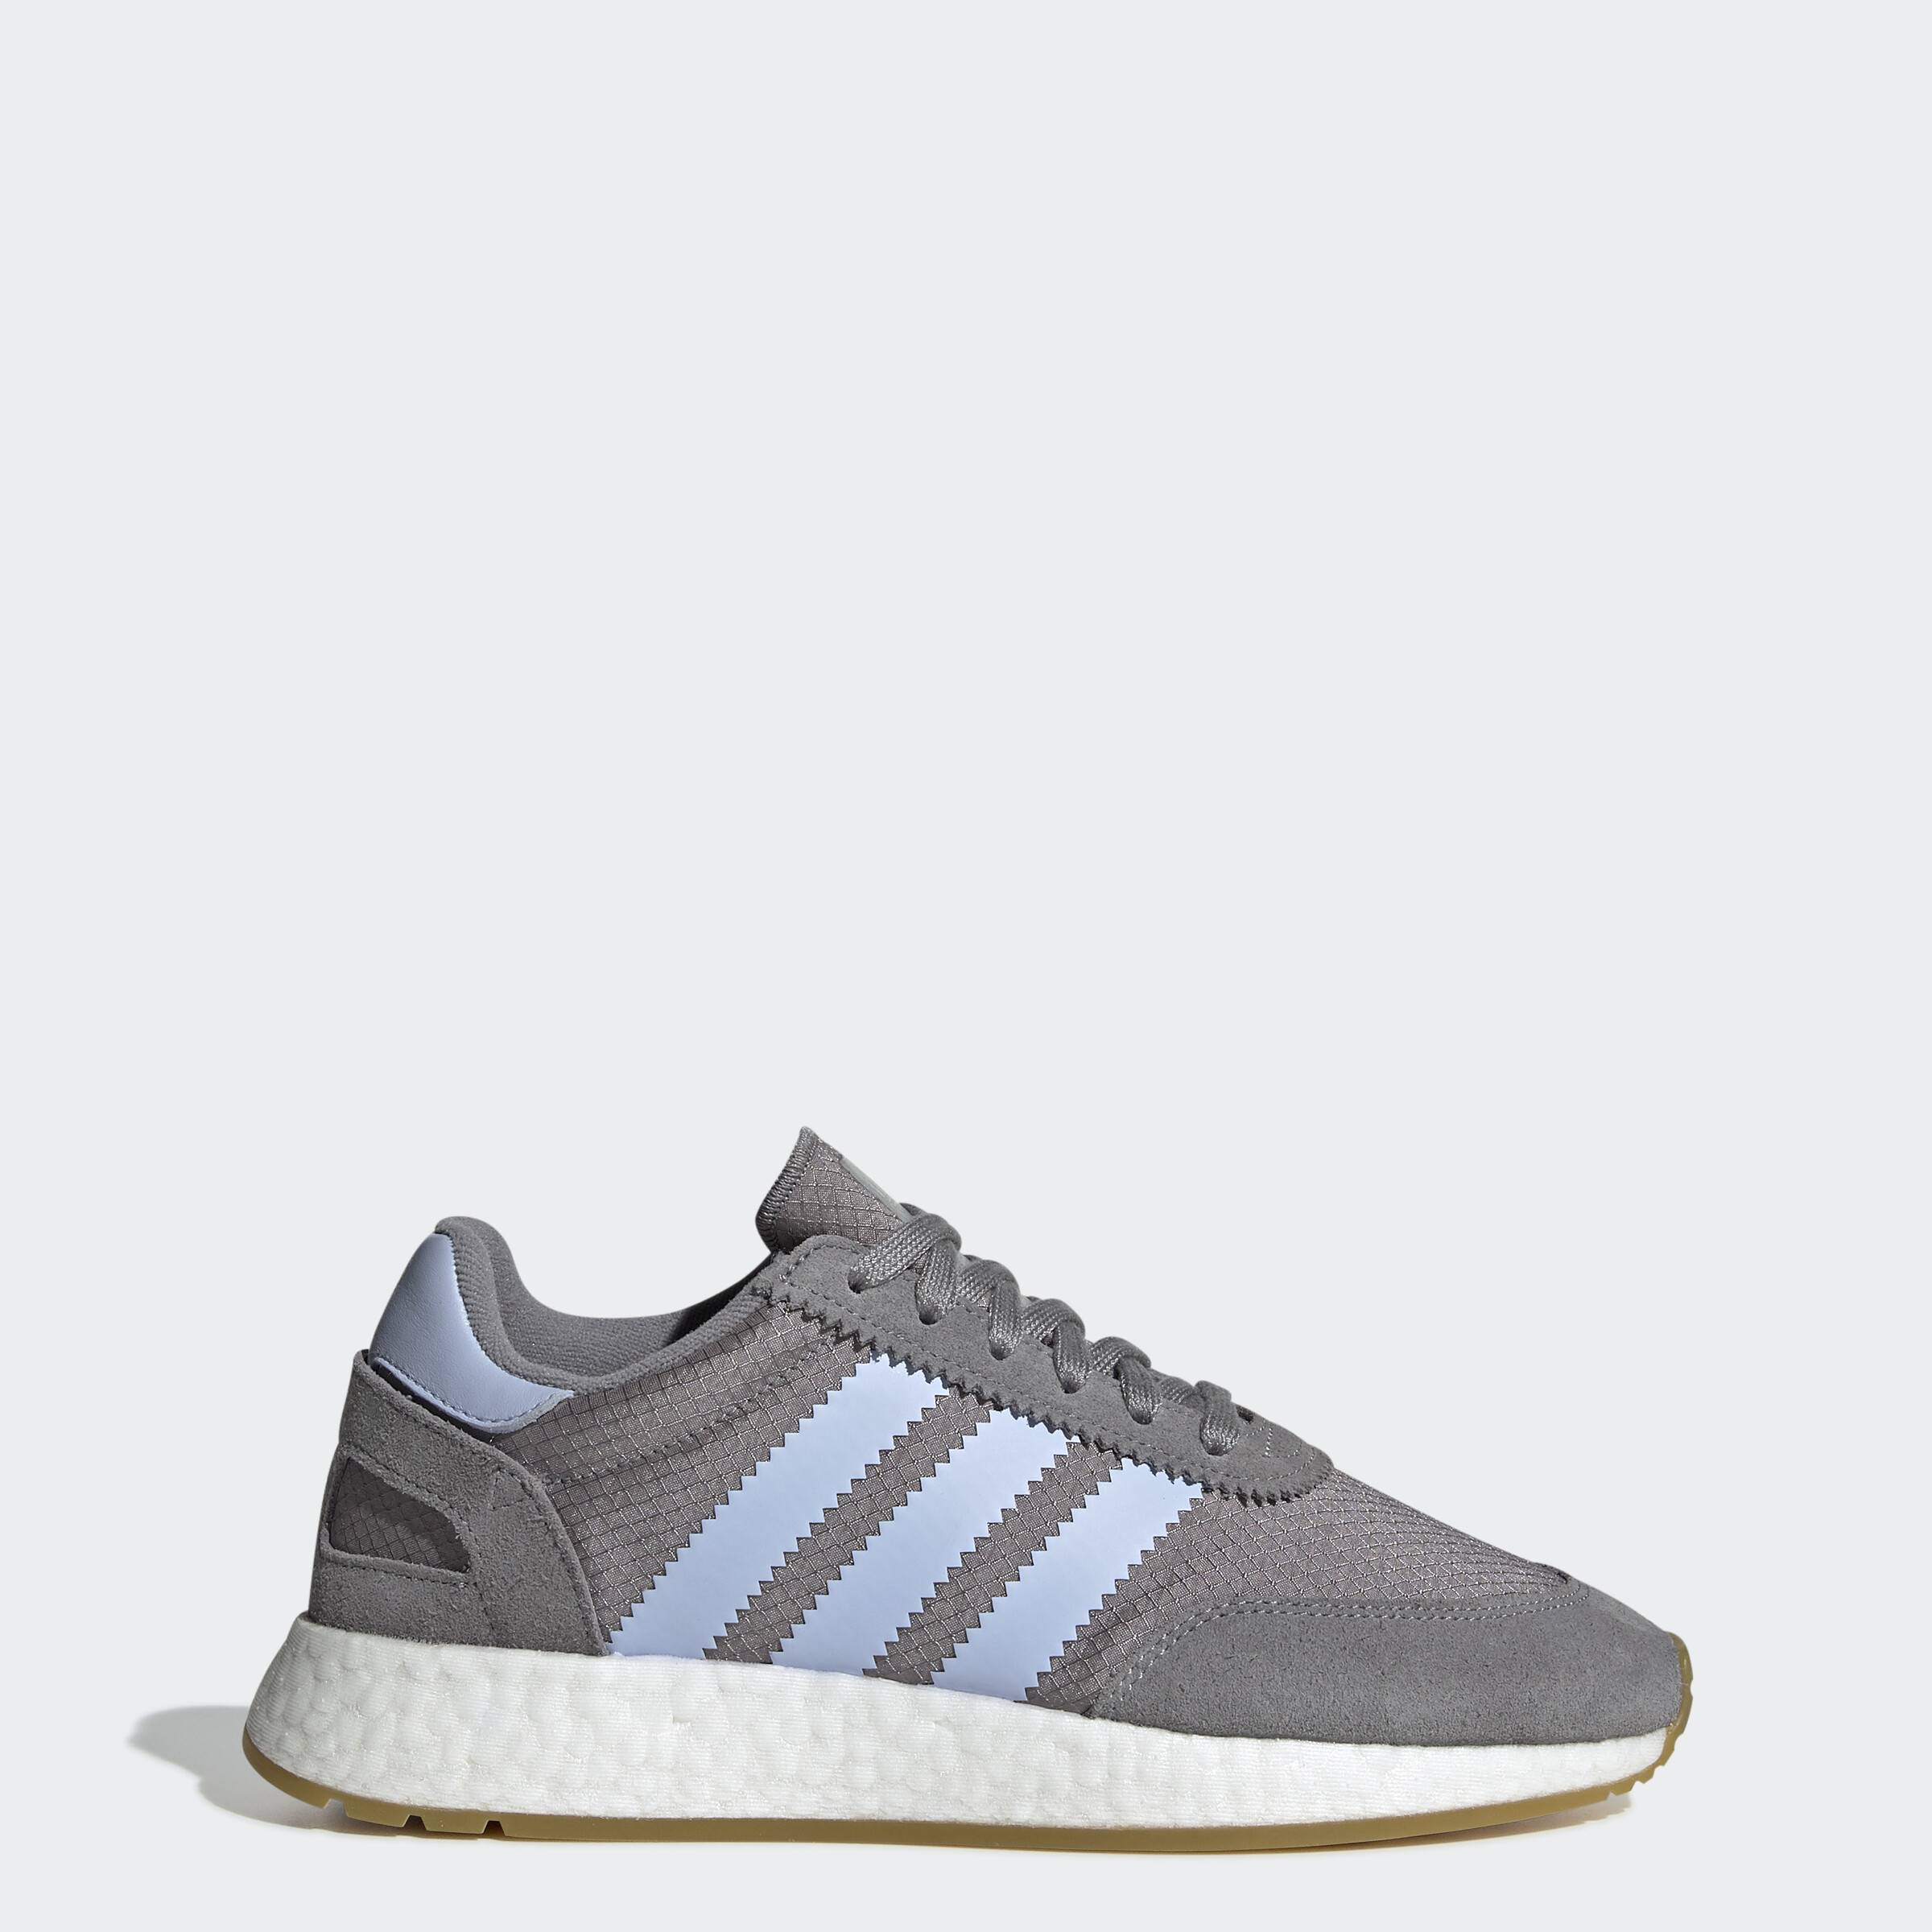 beige adidas shoes womens